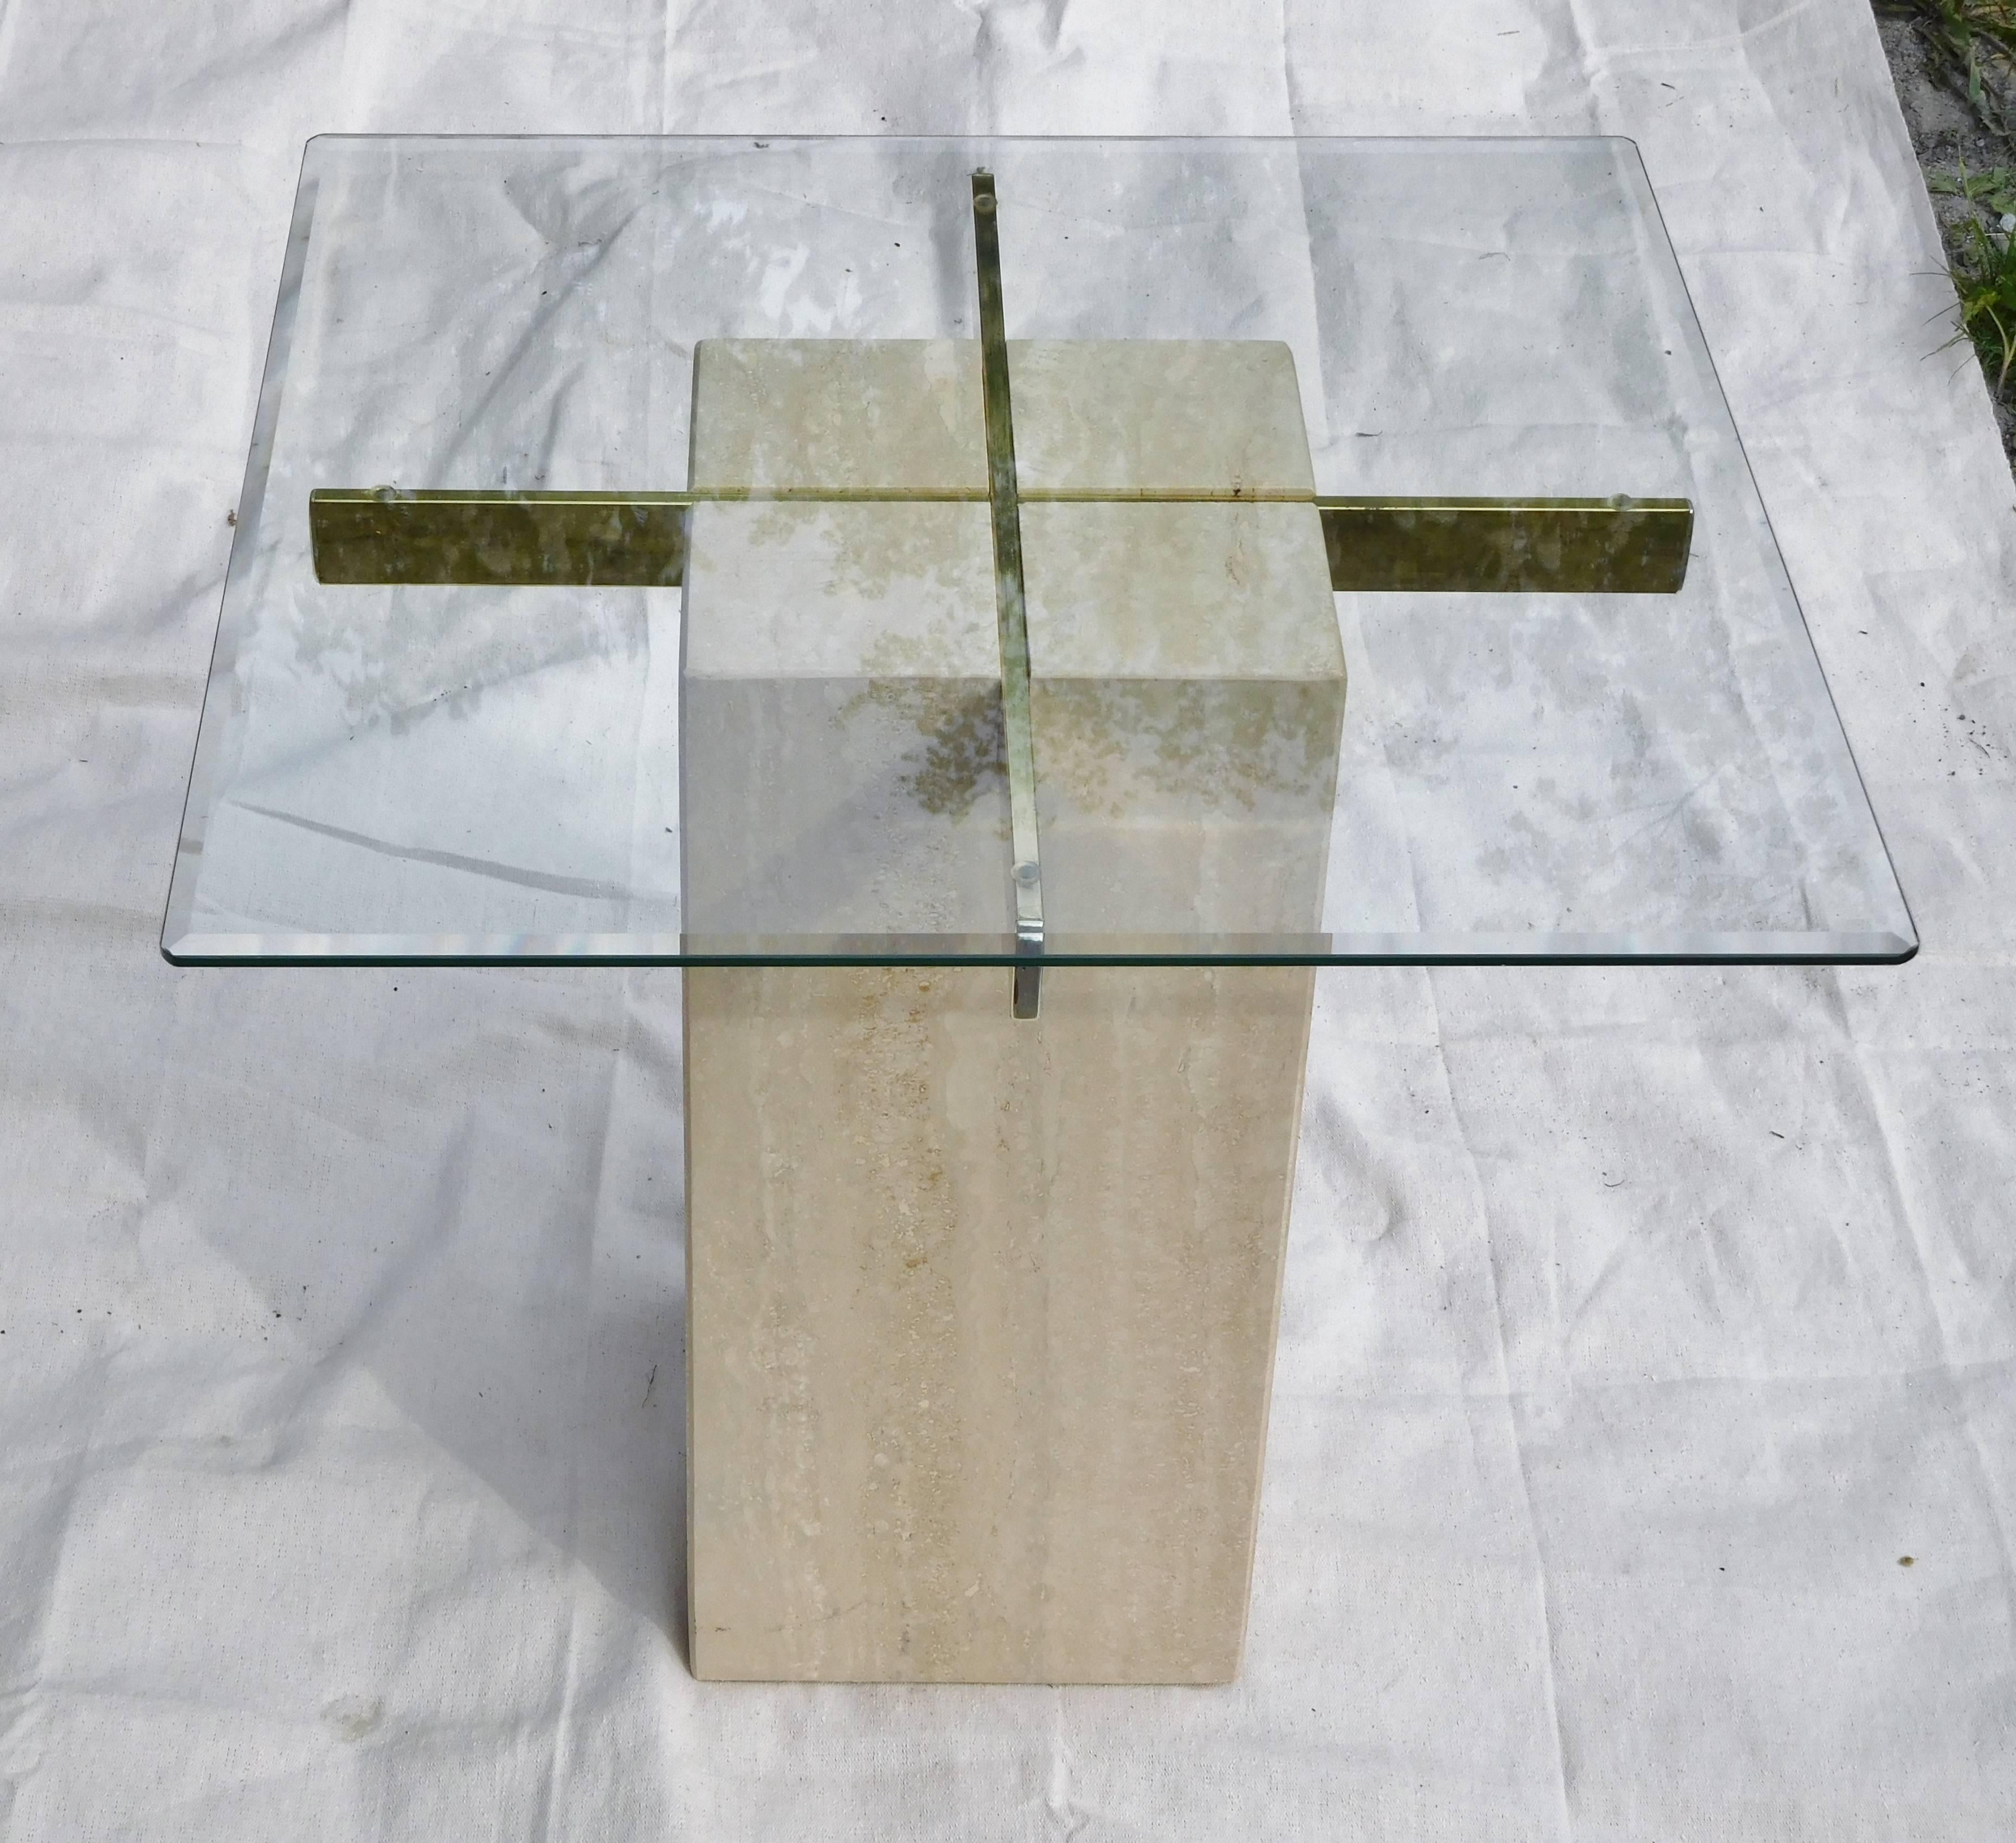 Artedi Vintage Occasional Table in Travertine, Brass, Beveled Glass, circa 1985 In Good Condition For Sale In Quechee, VT